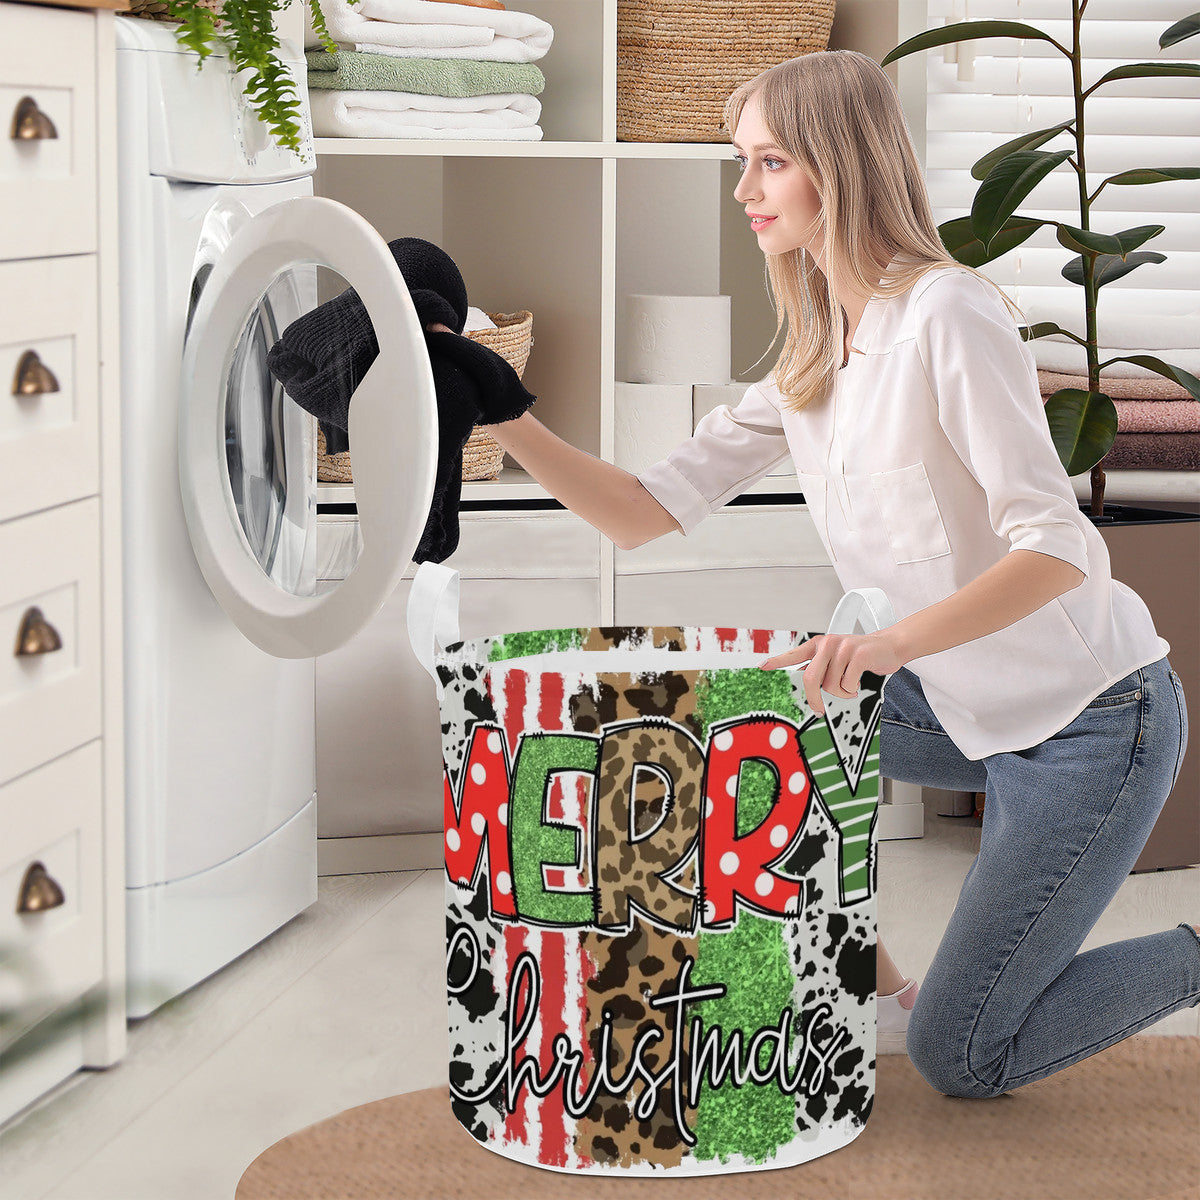 Round Laundry Basket Merry and Bright Christmas decoration Home-clothes-jewelry